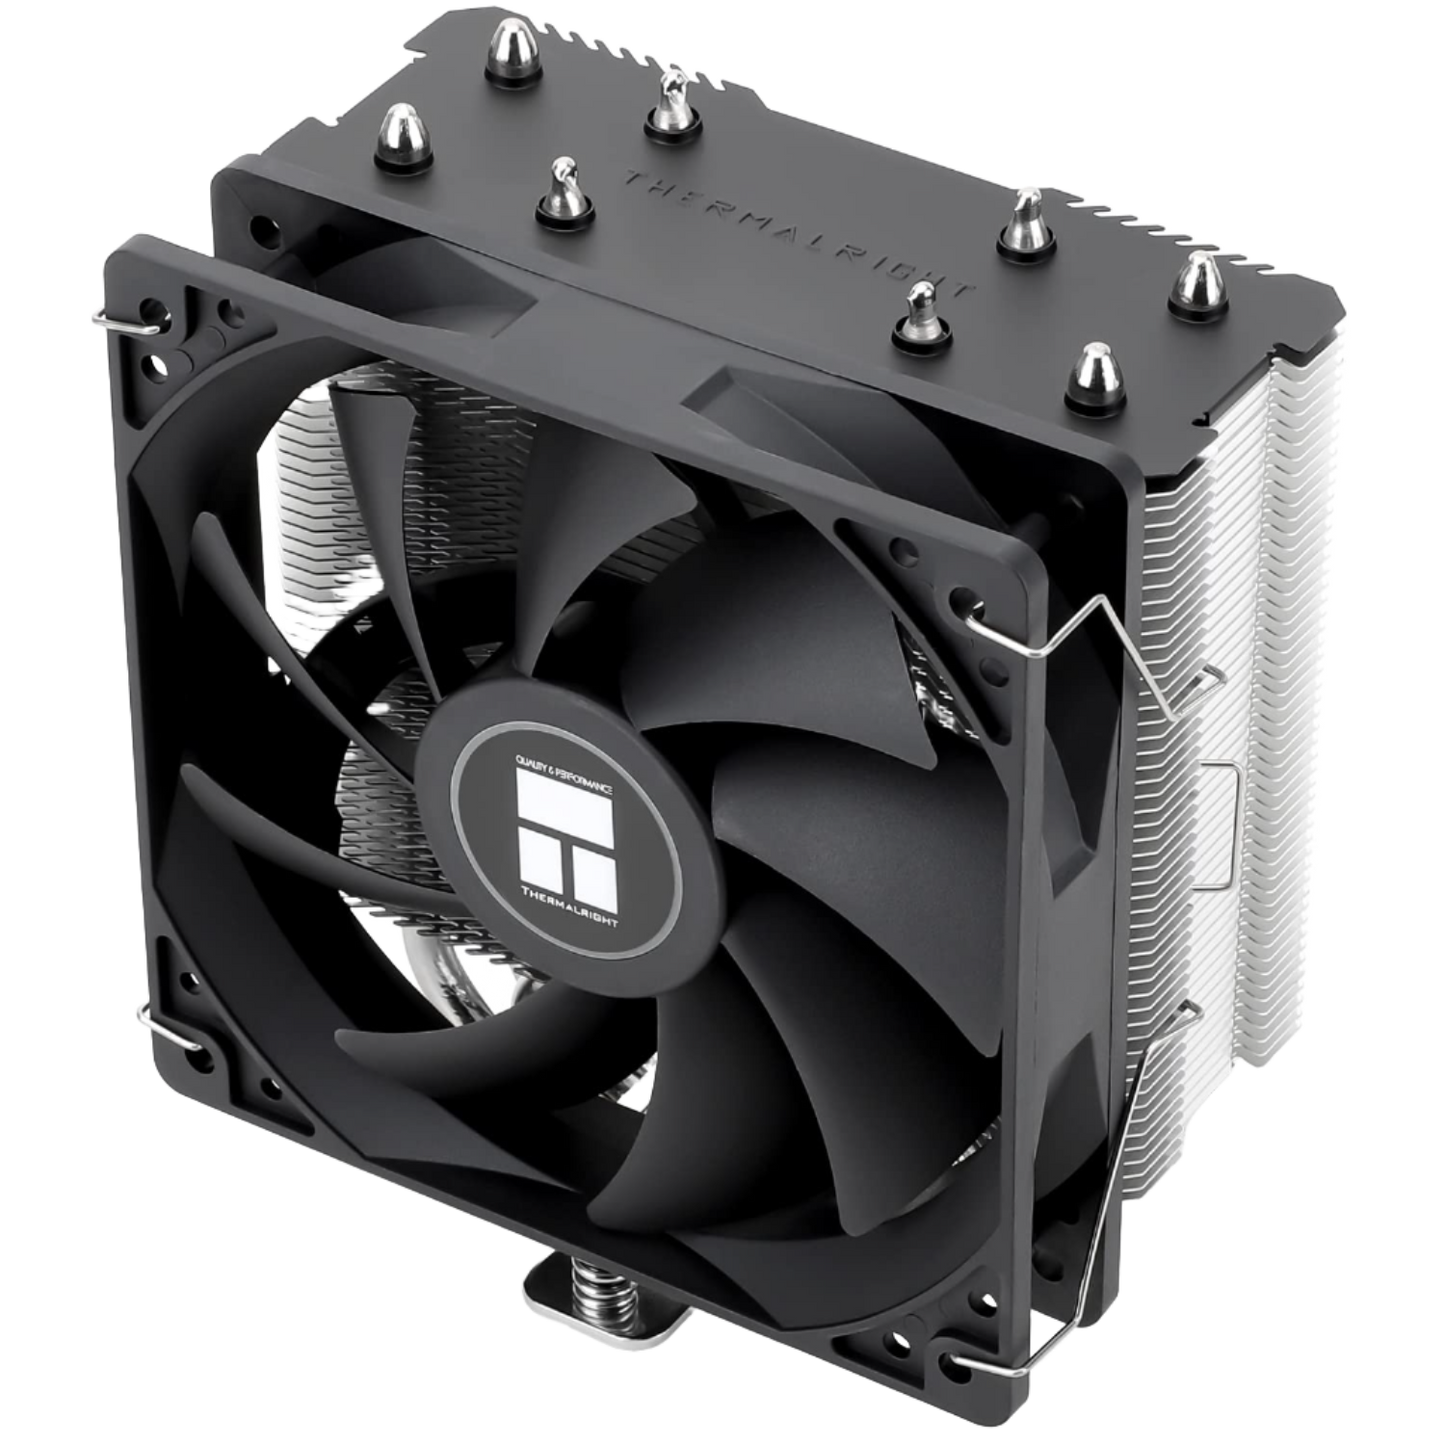 Thermalright Assassin X 120R SE CPU Cooler